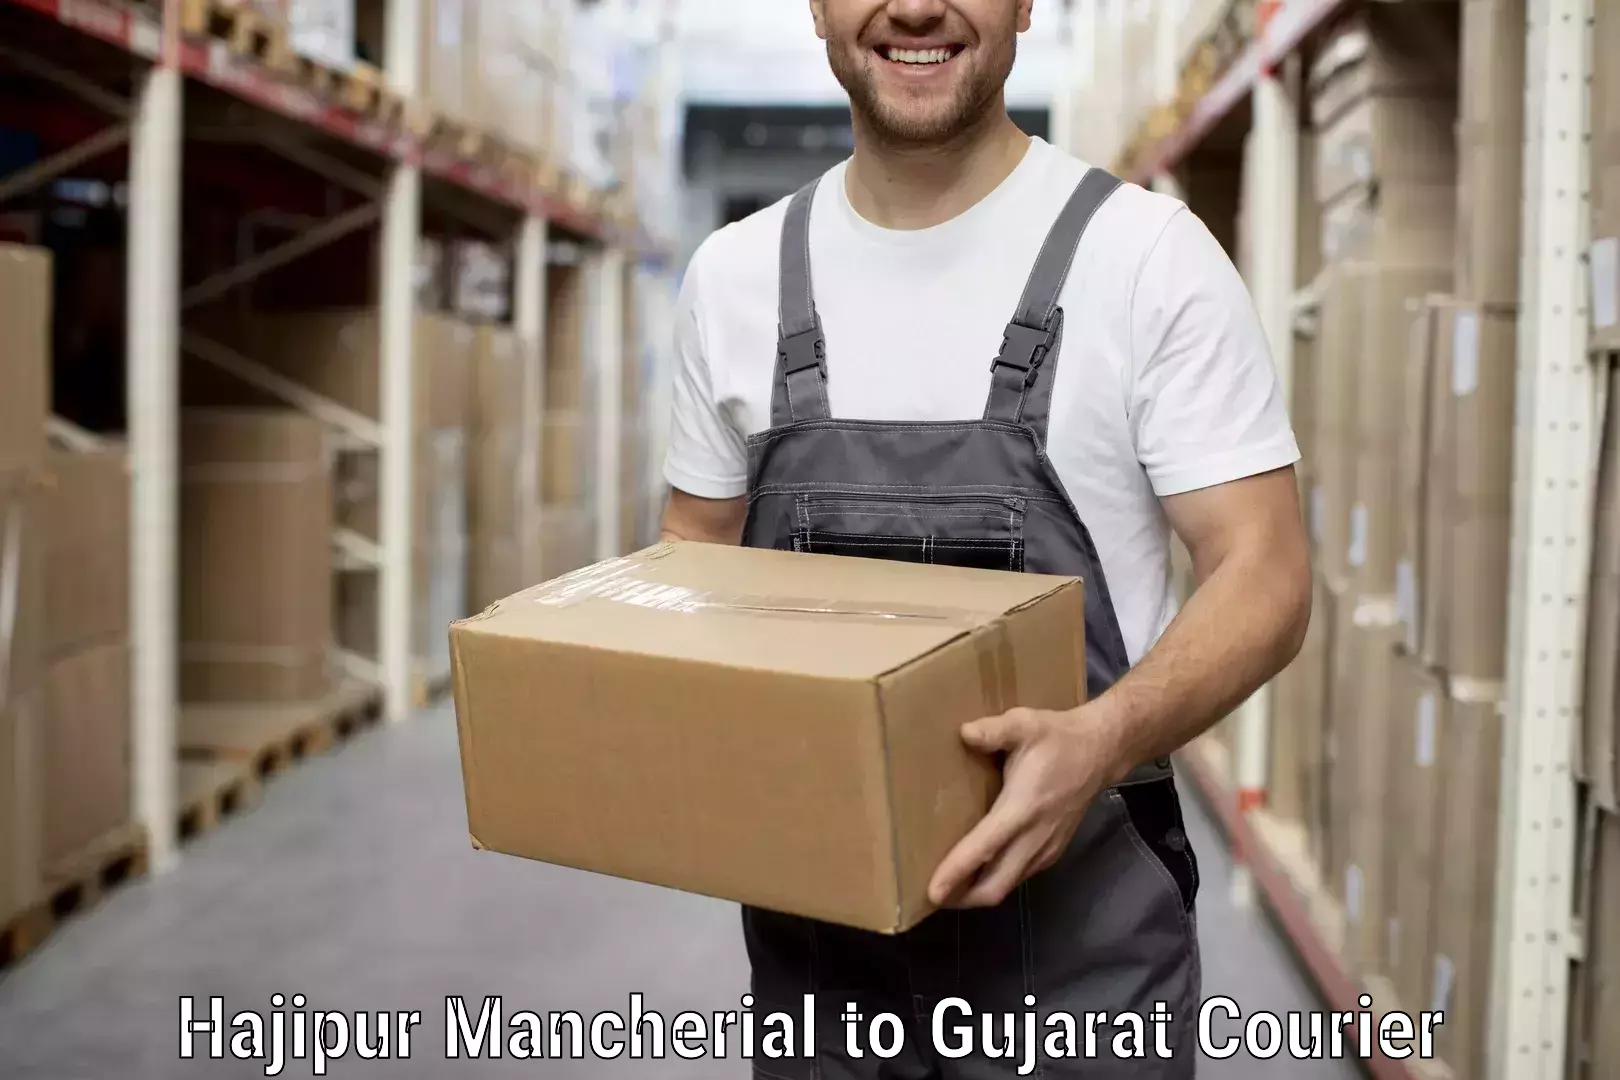 Residential moving experts Hajipur Mancherial to Dharampur Valsad